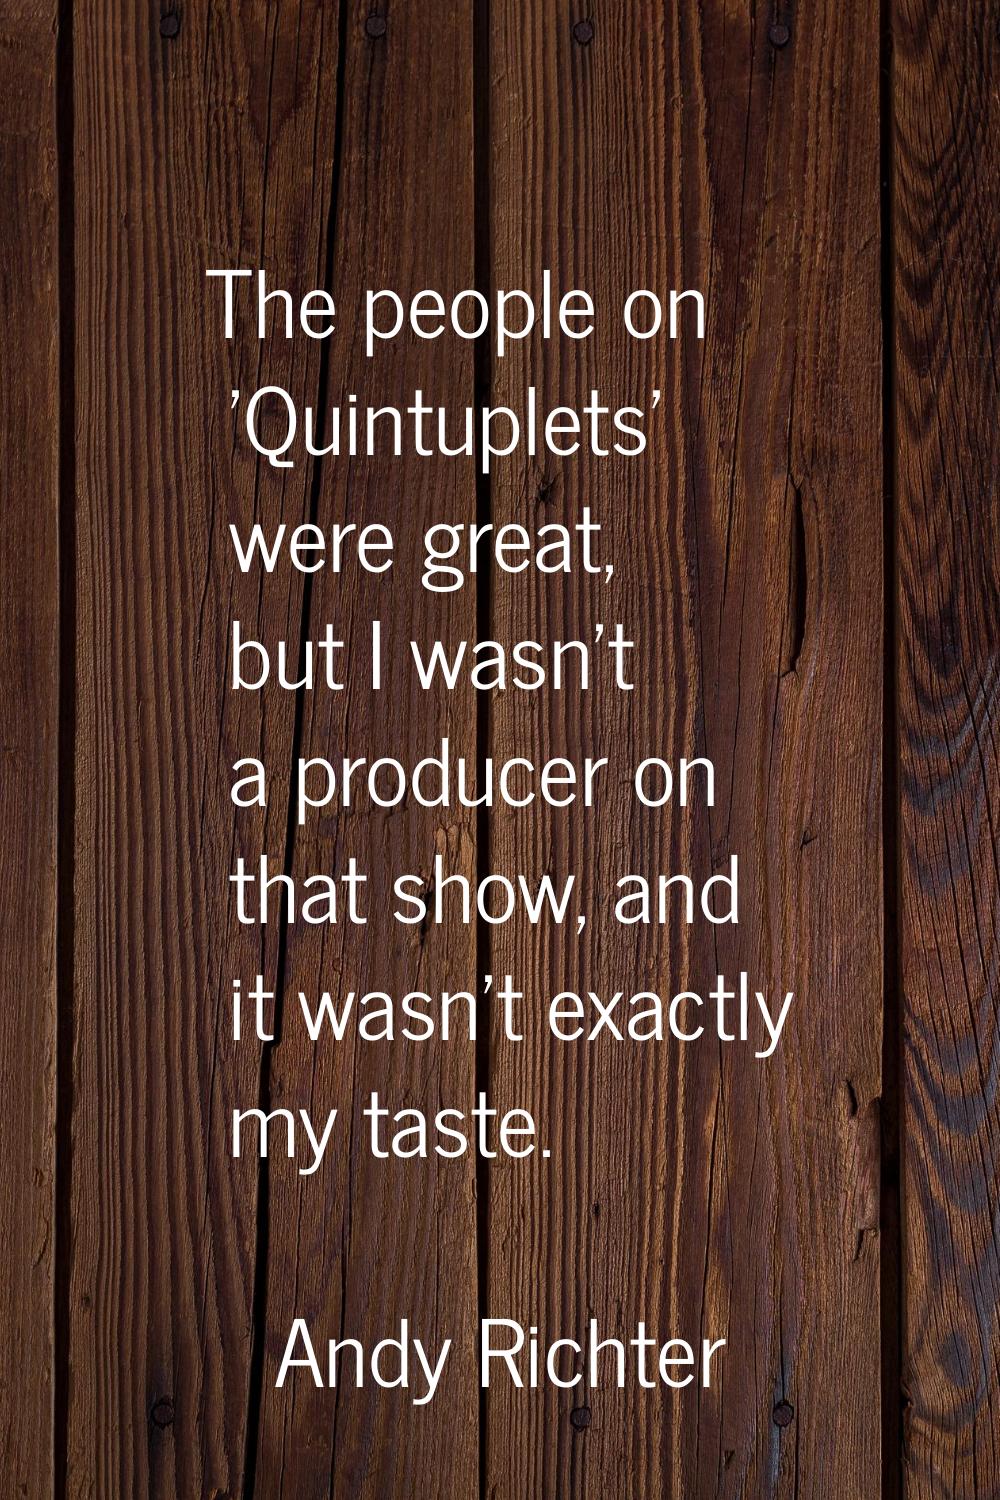 The people on 'Quintuplets' were great, but I wasn't a producer on that show, and it wasn't exactly